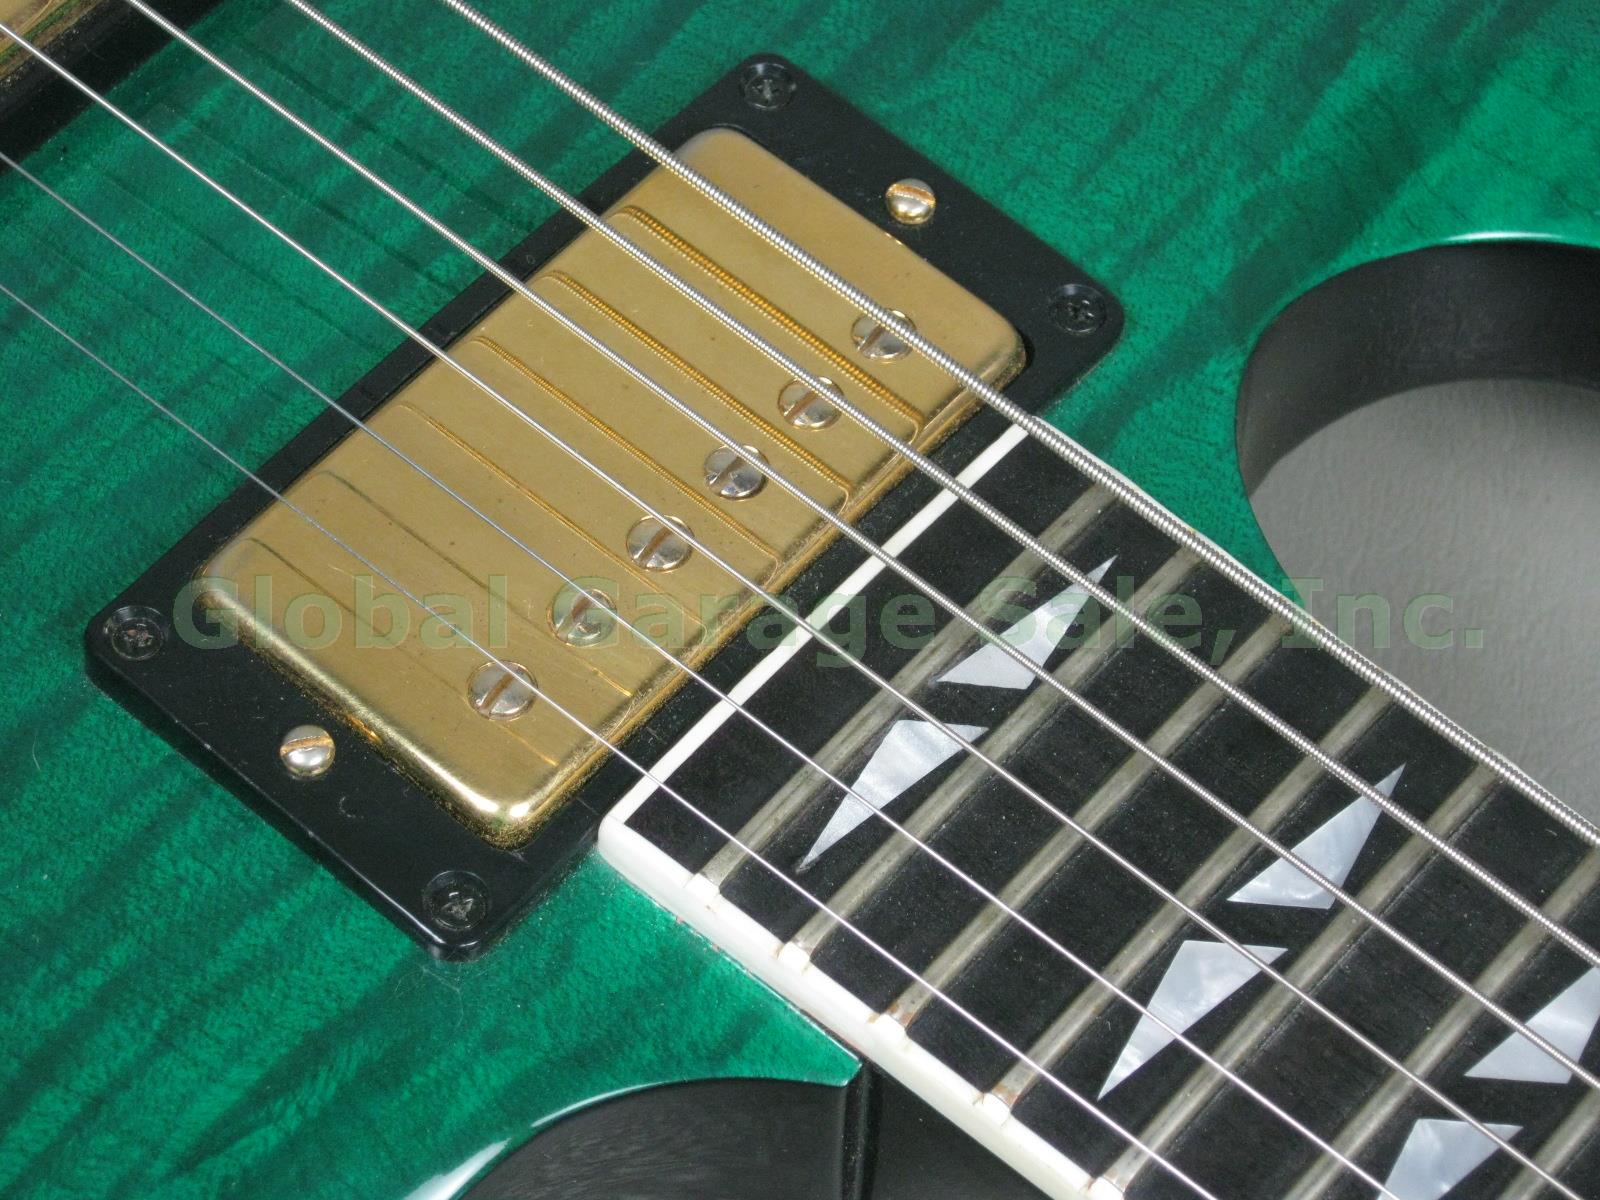 2003 Gibson SG Supreme Electric Guitar Emerald Green One Owner TKL Hard Case 7